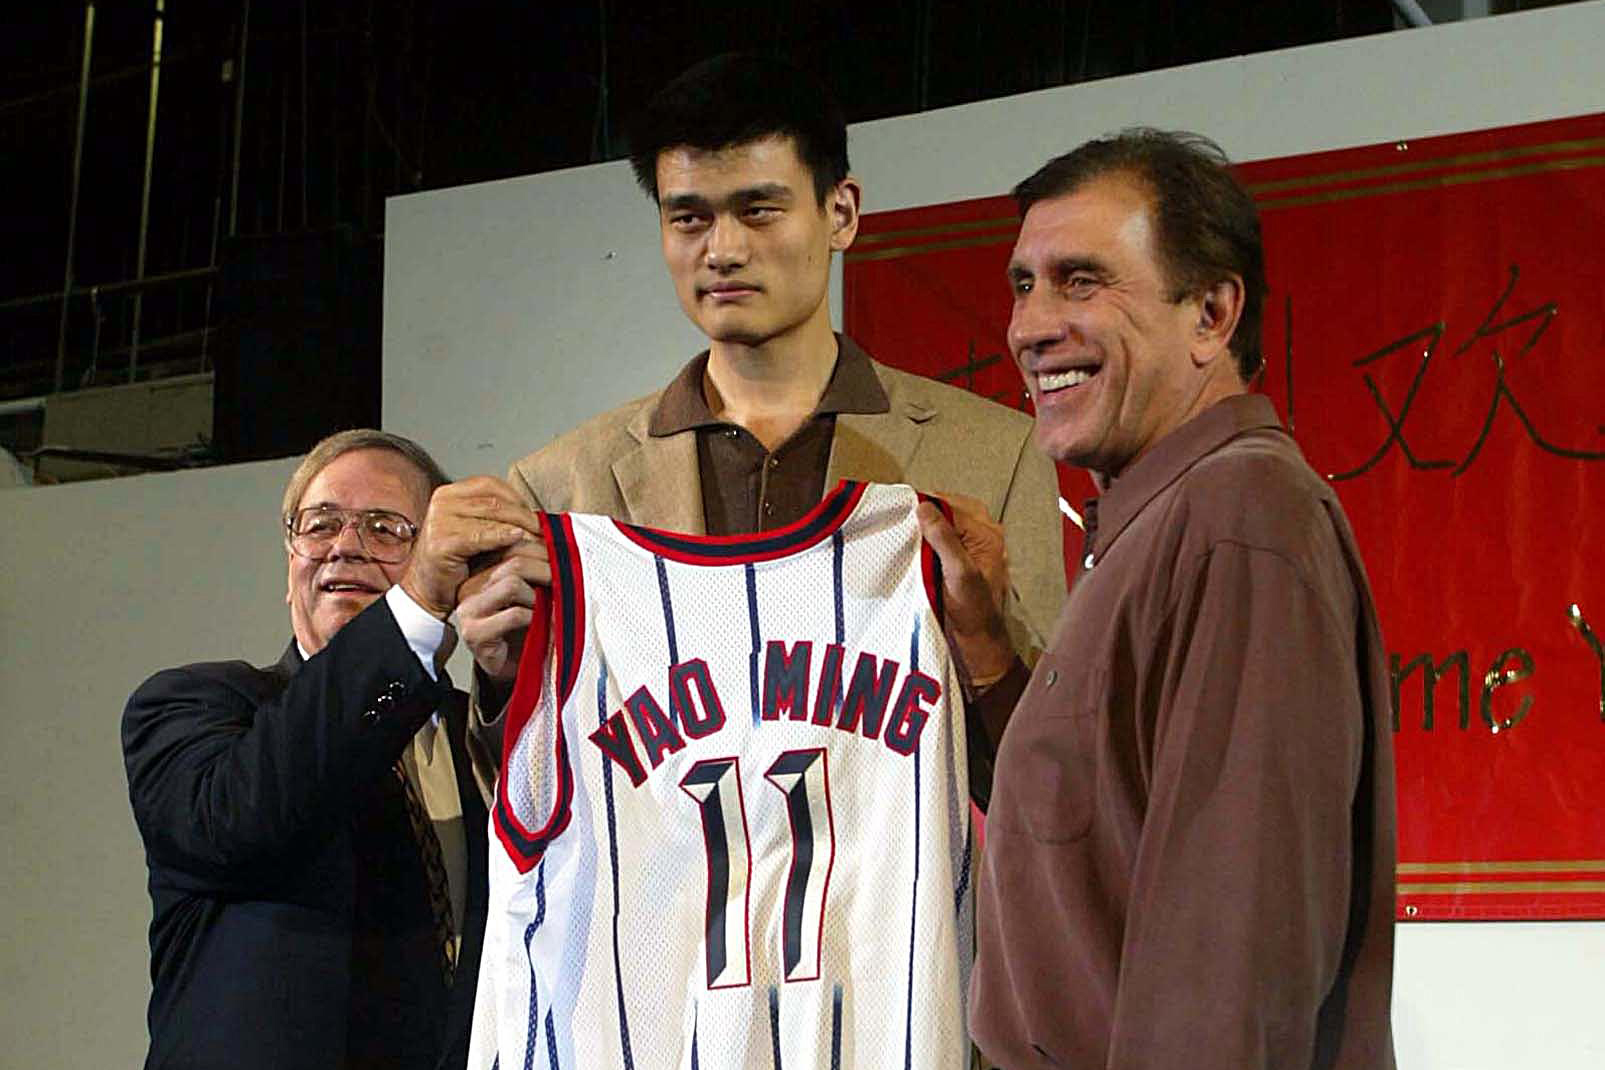 Book excerpt: Yao Ming's Rockets career like no other - HoustonChronicle.com1605 x 1070